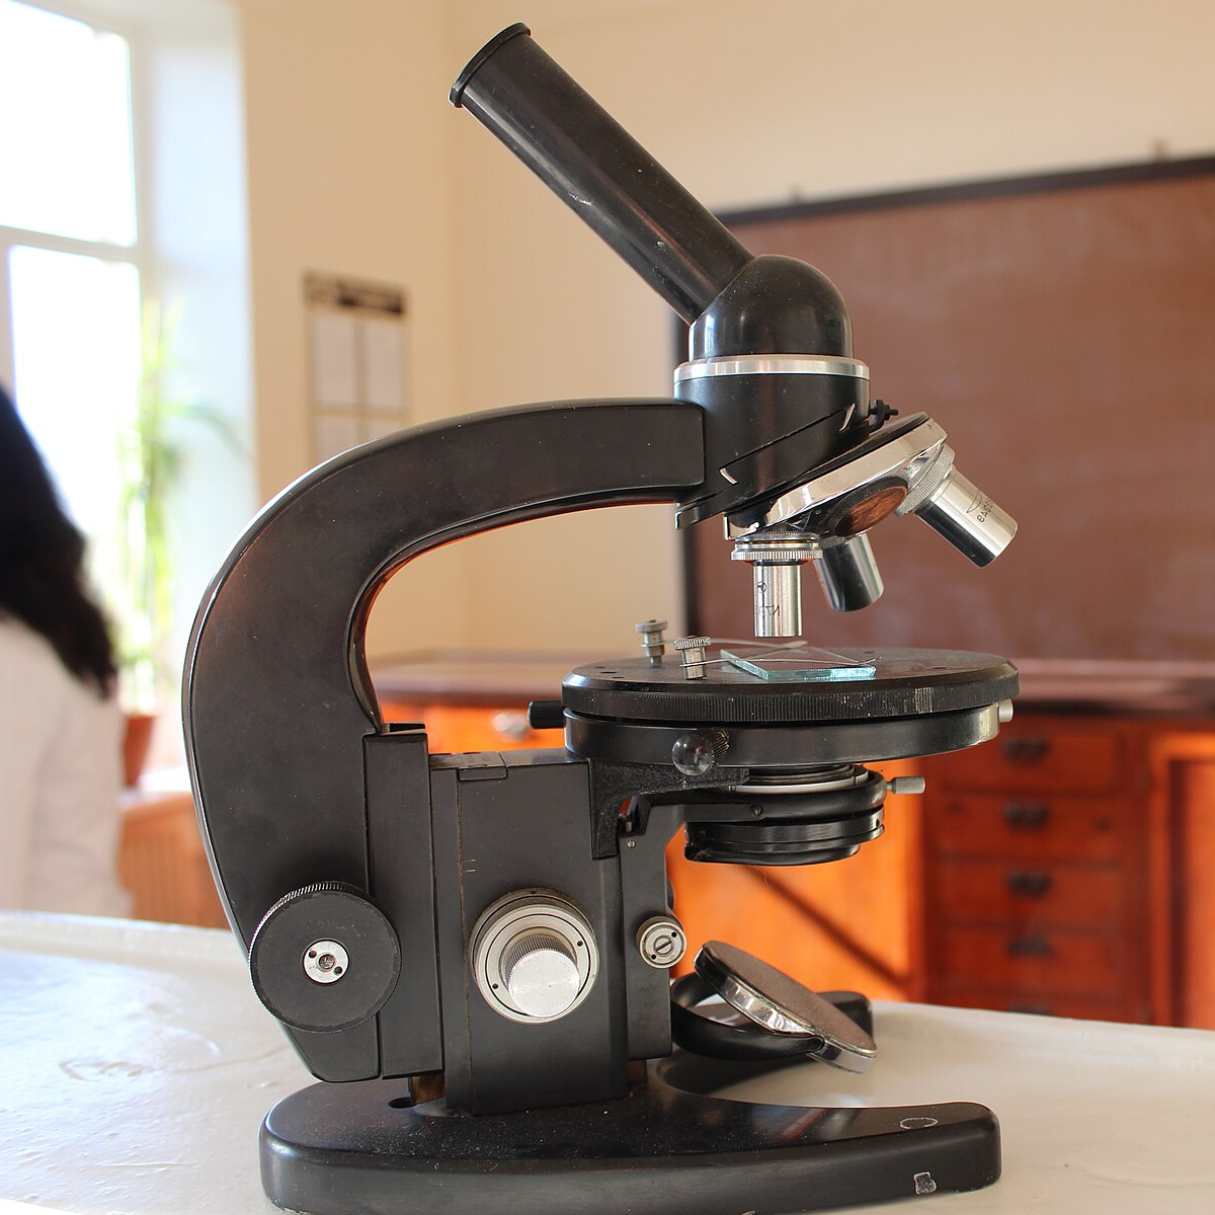 Microscope Review: The Perfect Tool for Her Scientific Exploration